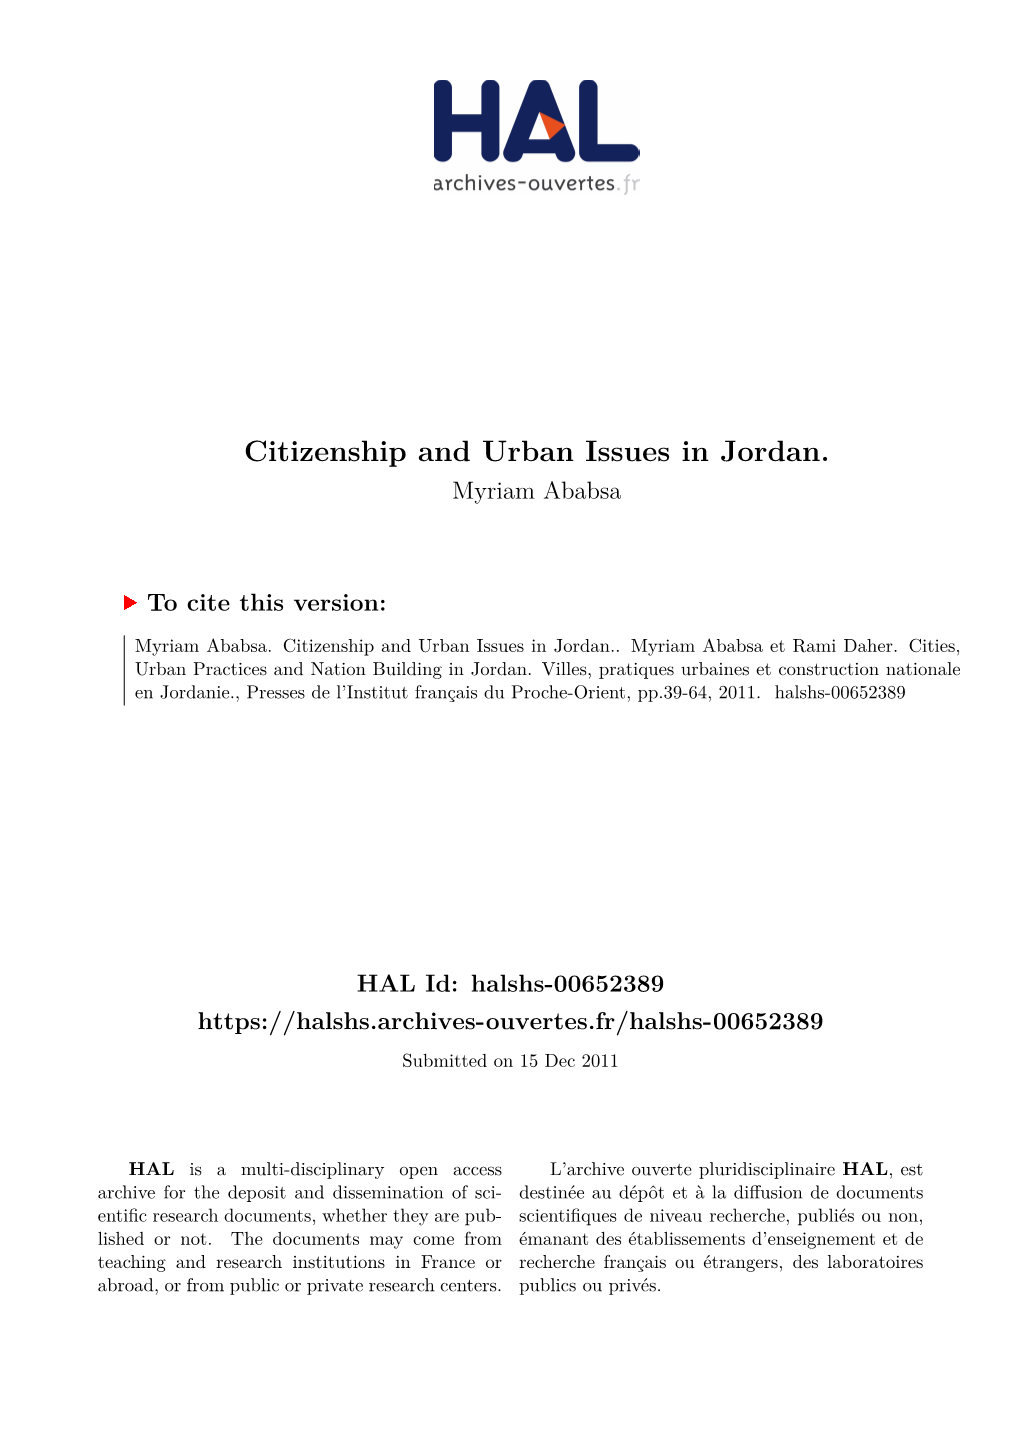 Citizenship and Urban Issues in Jordan. Myriam Ababsa